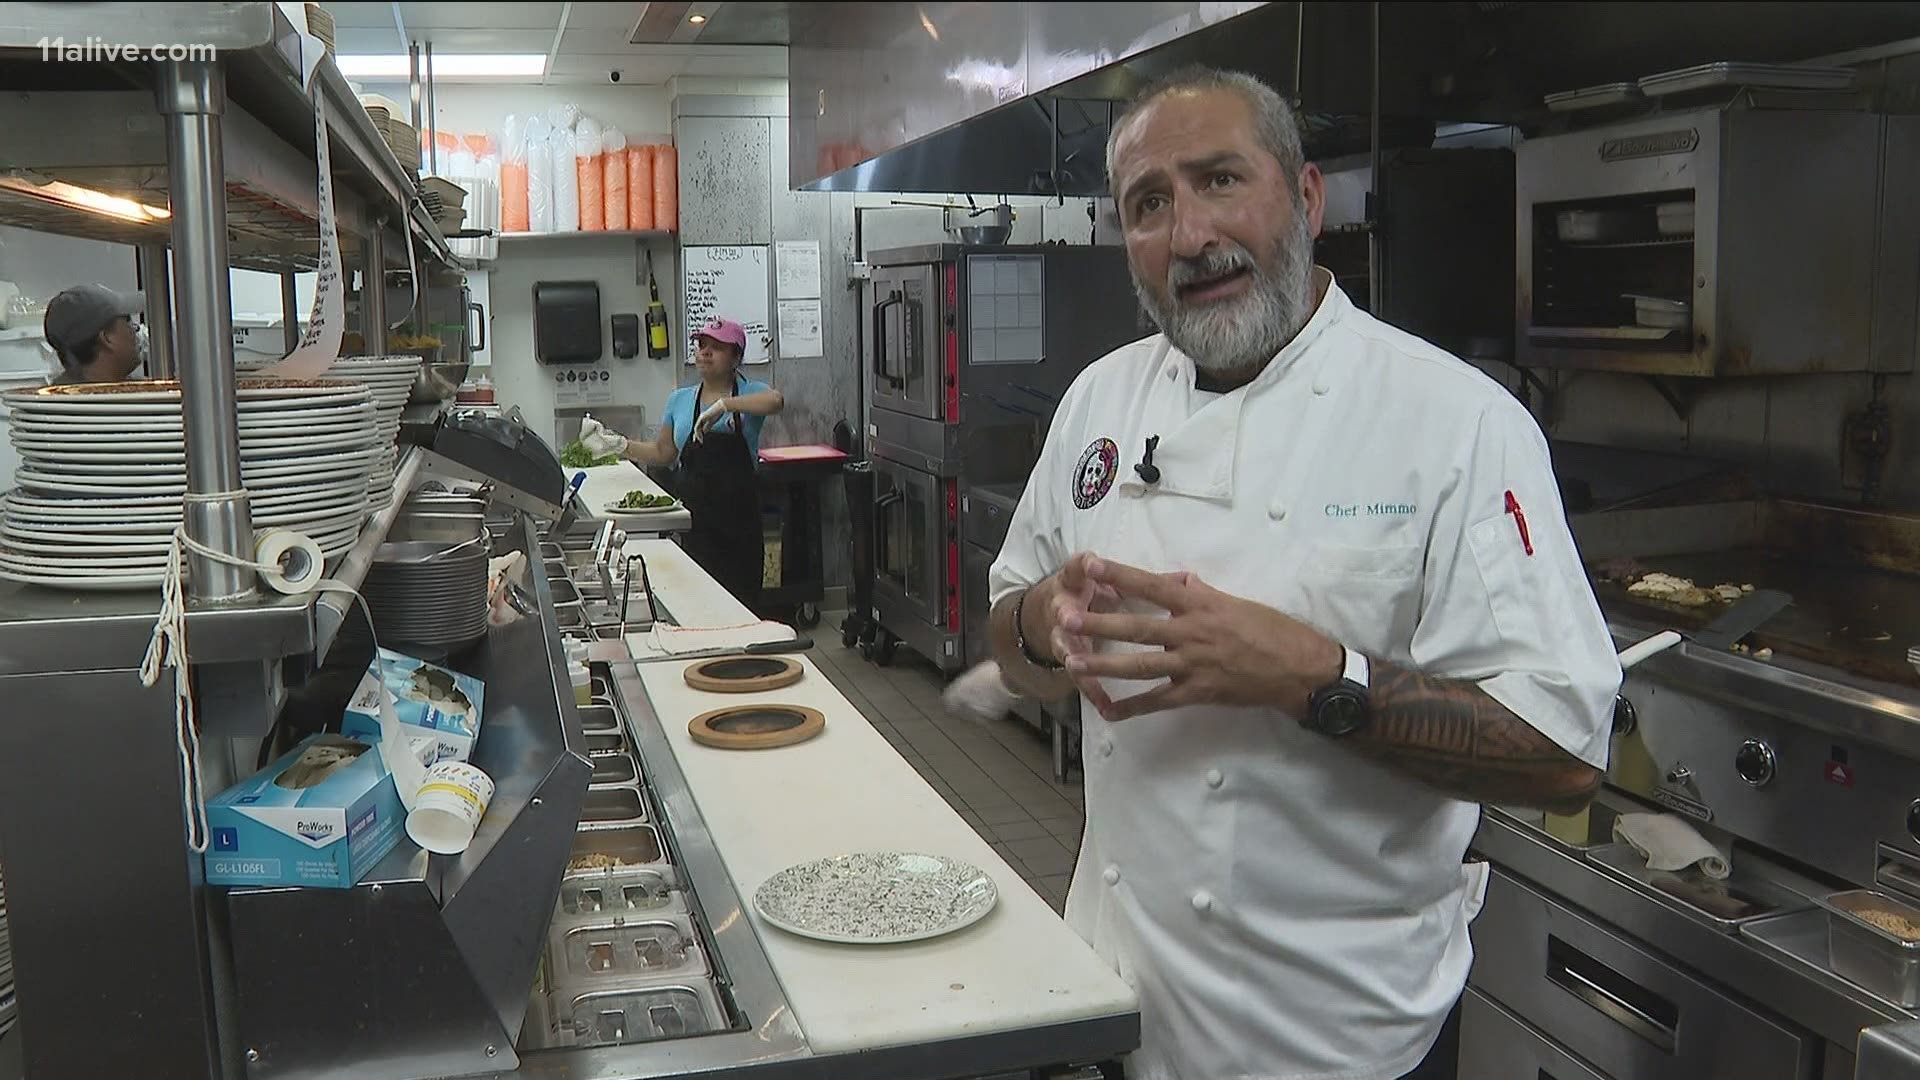 Chef Mimmo from Botica in Buckhead says owners need to make their employees feel appreciated to keep them at work.